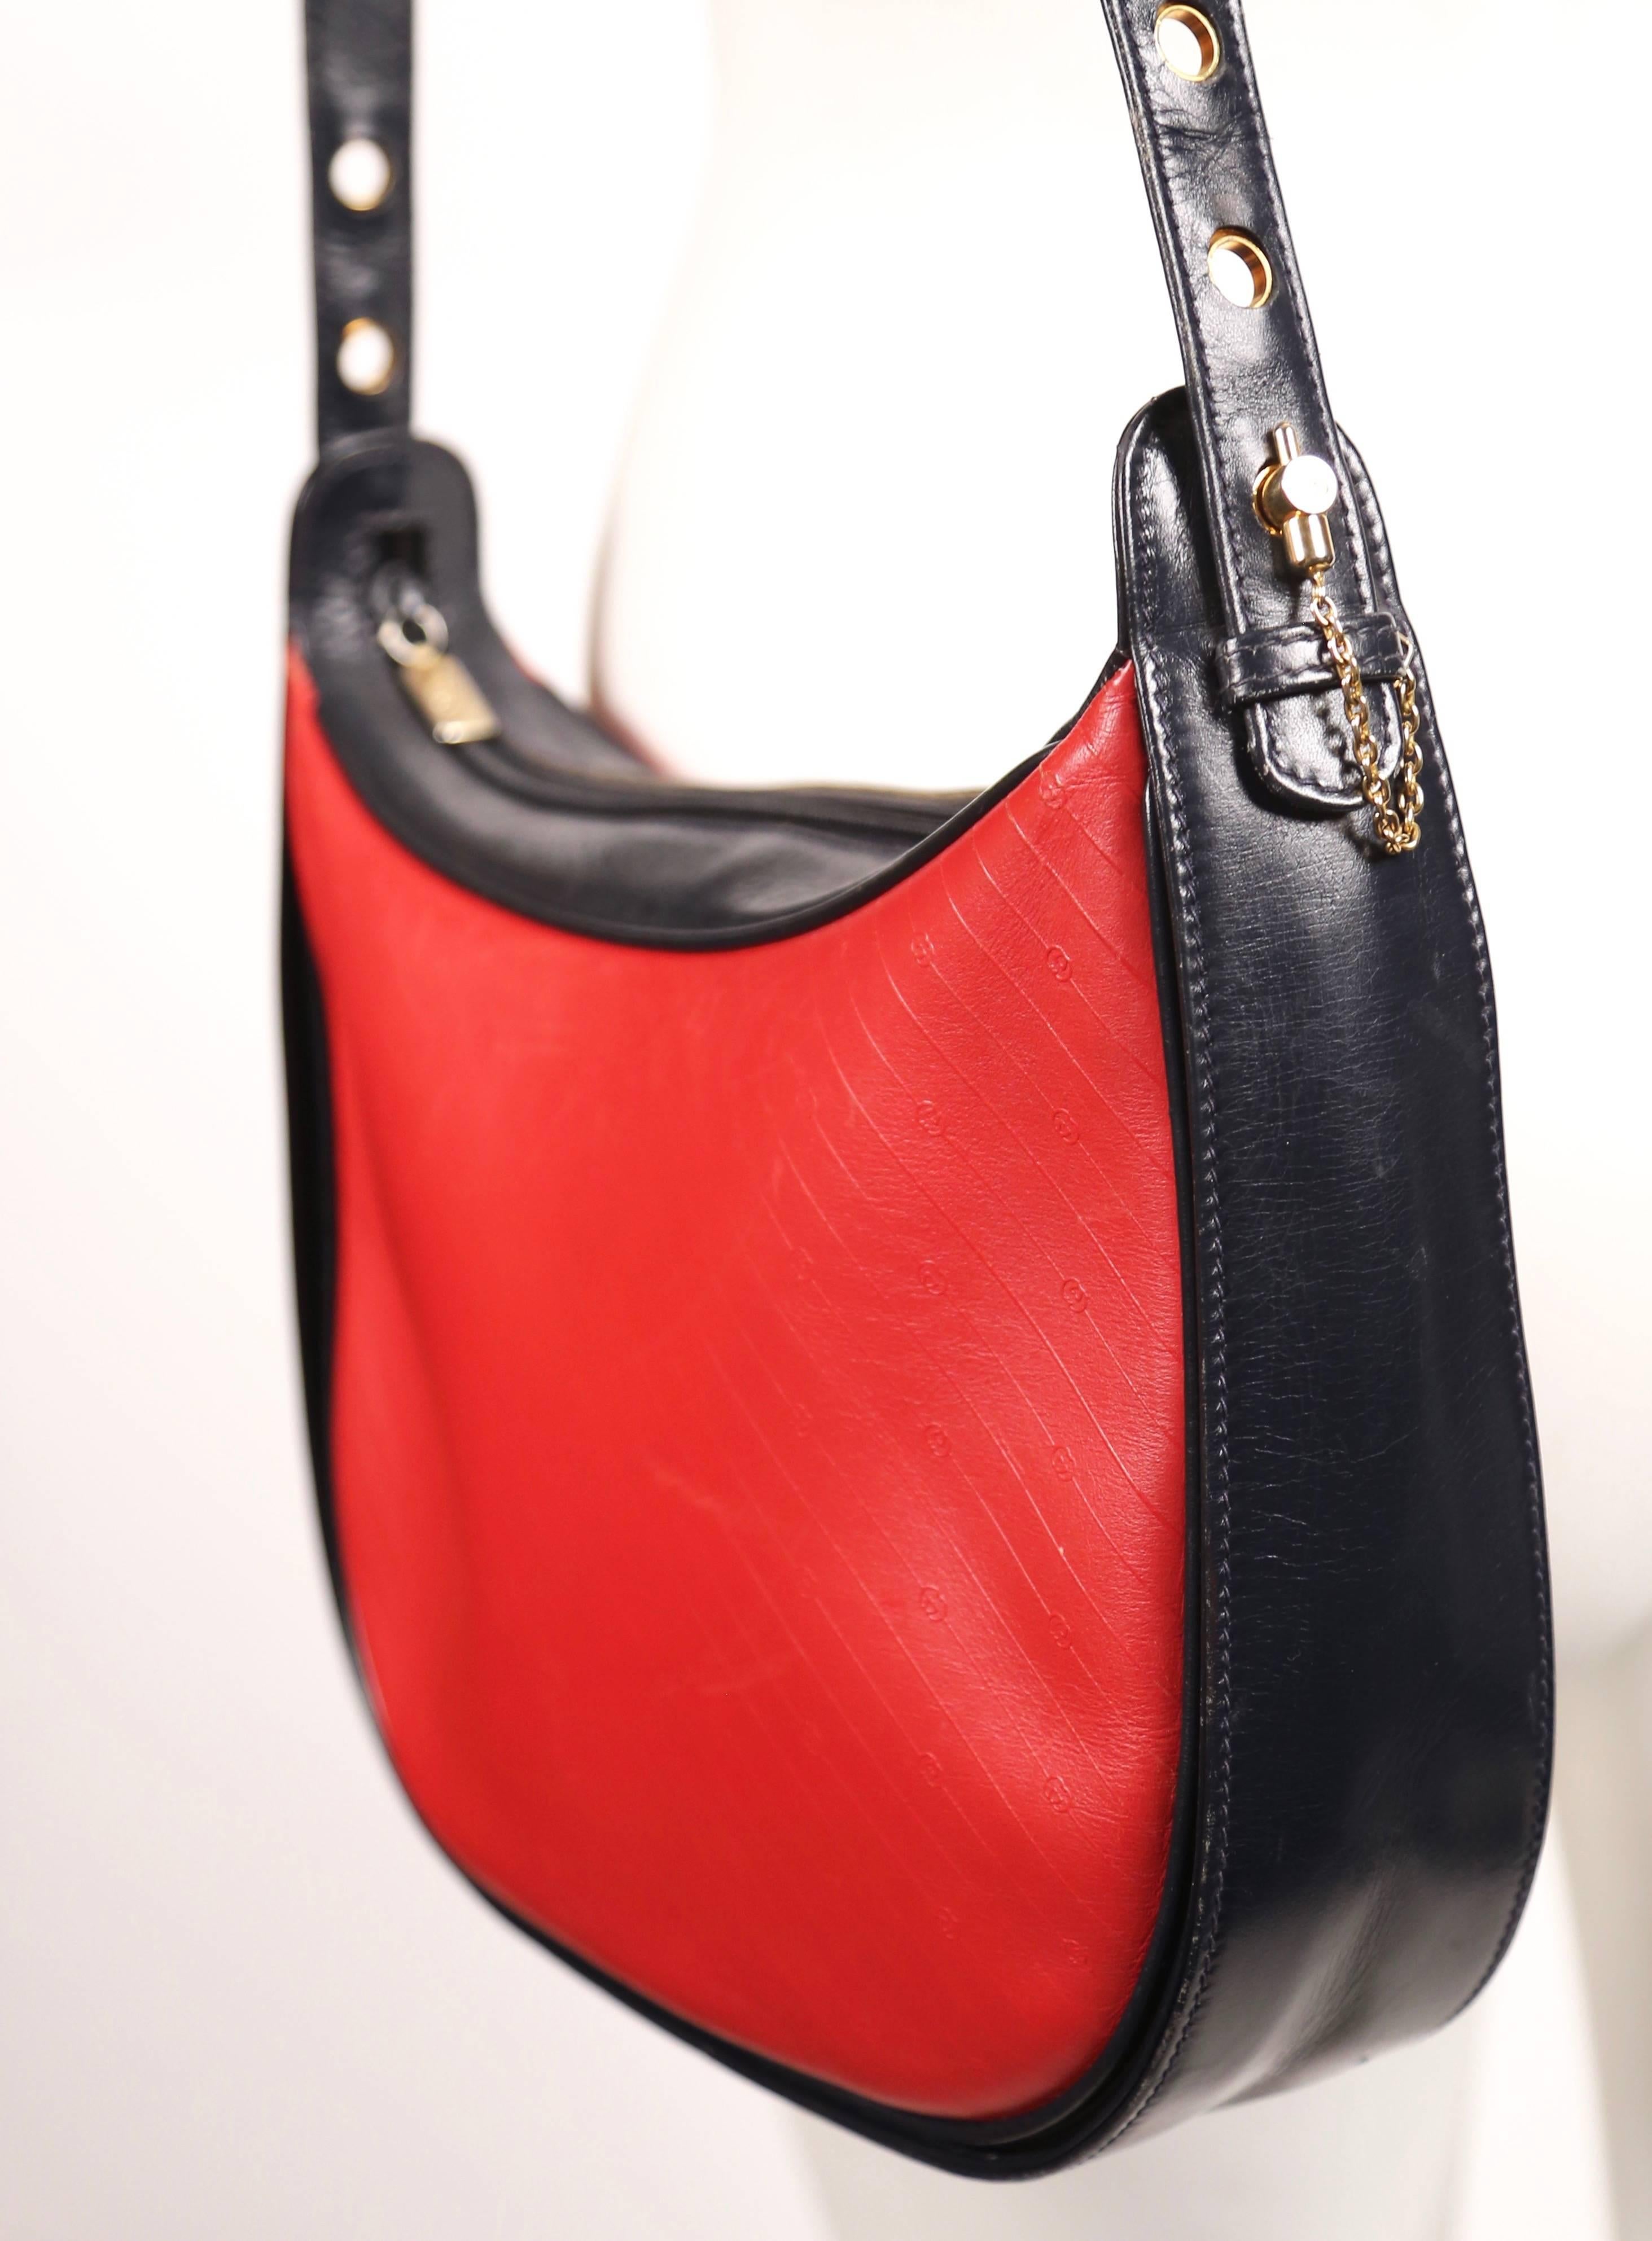 Red 1980's GUCCI navy and red embossed monogrammed leather bag 